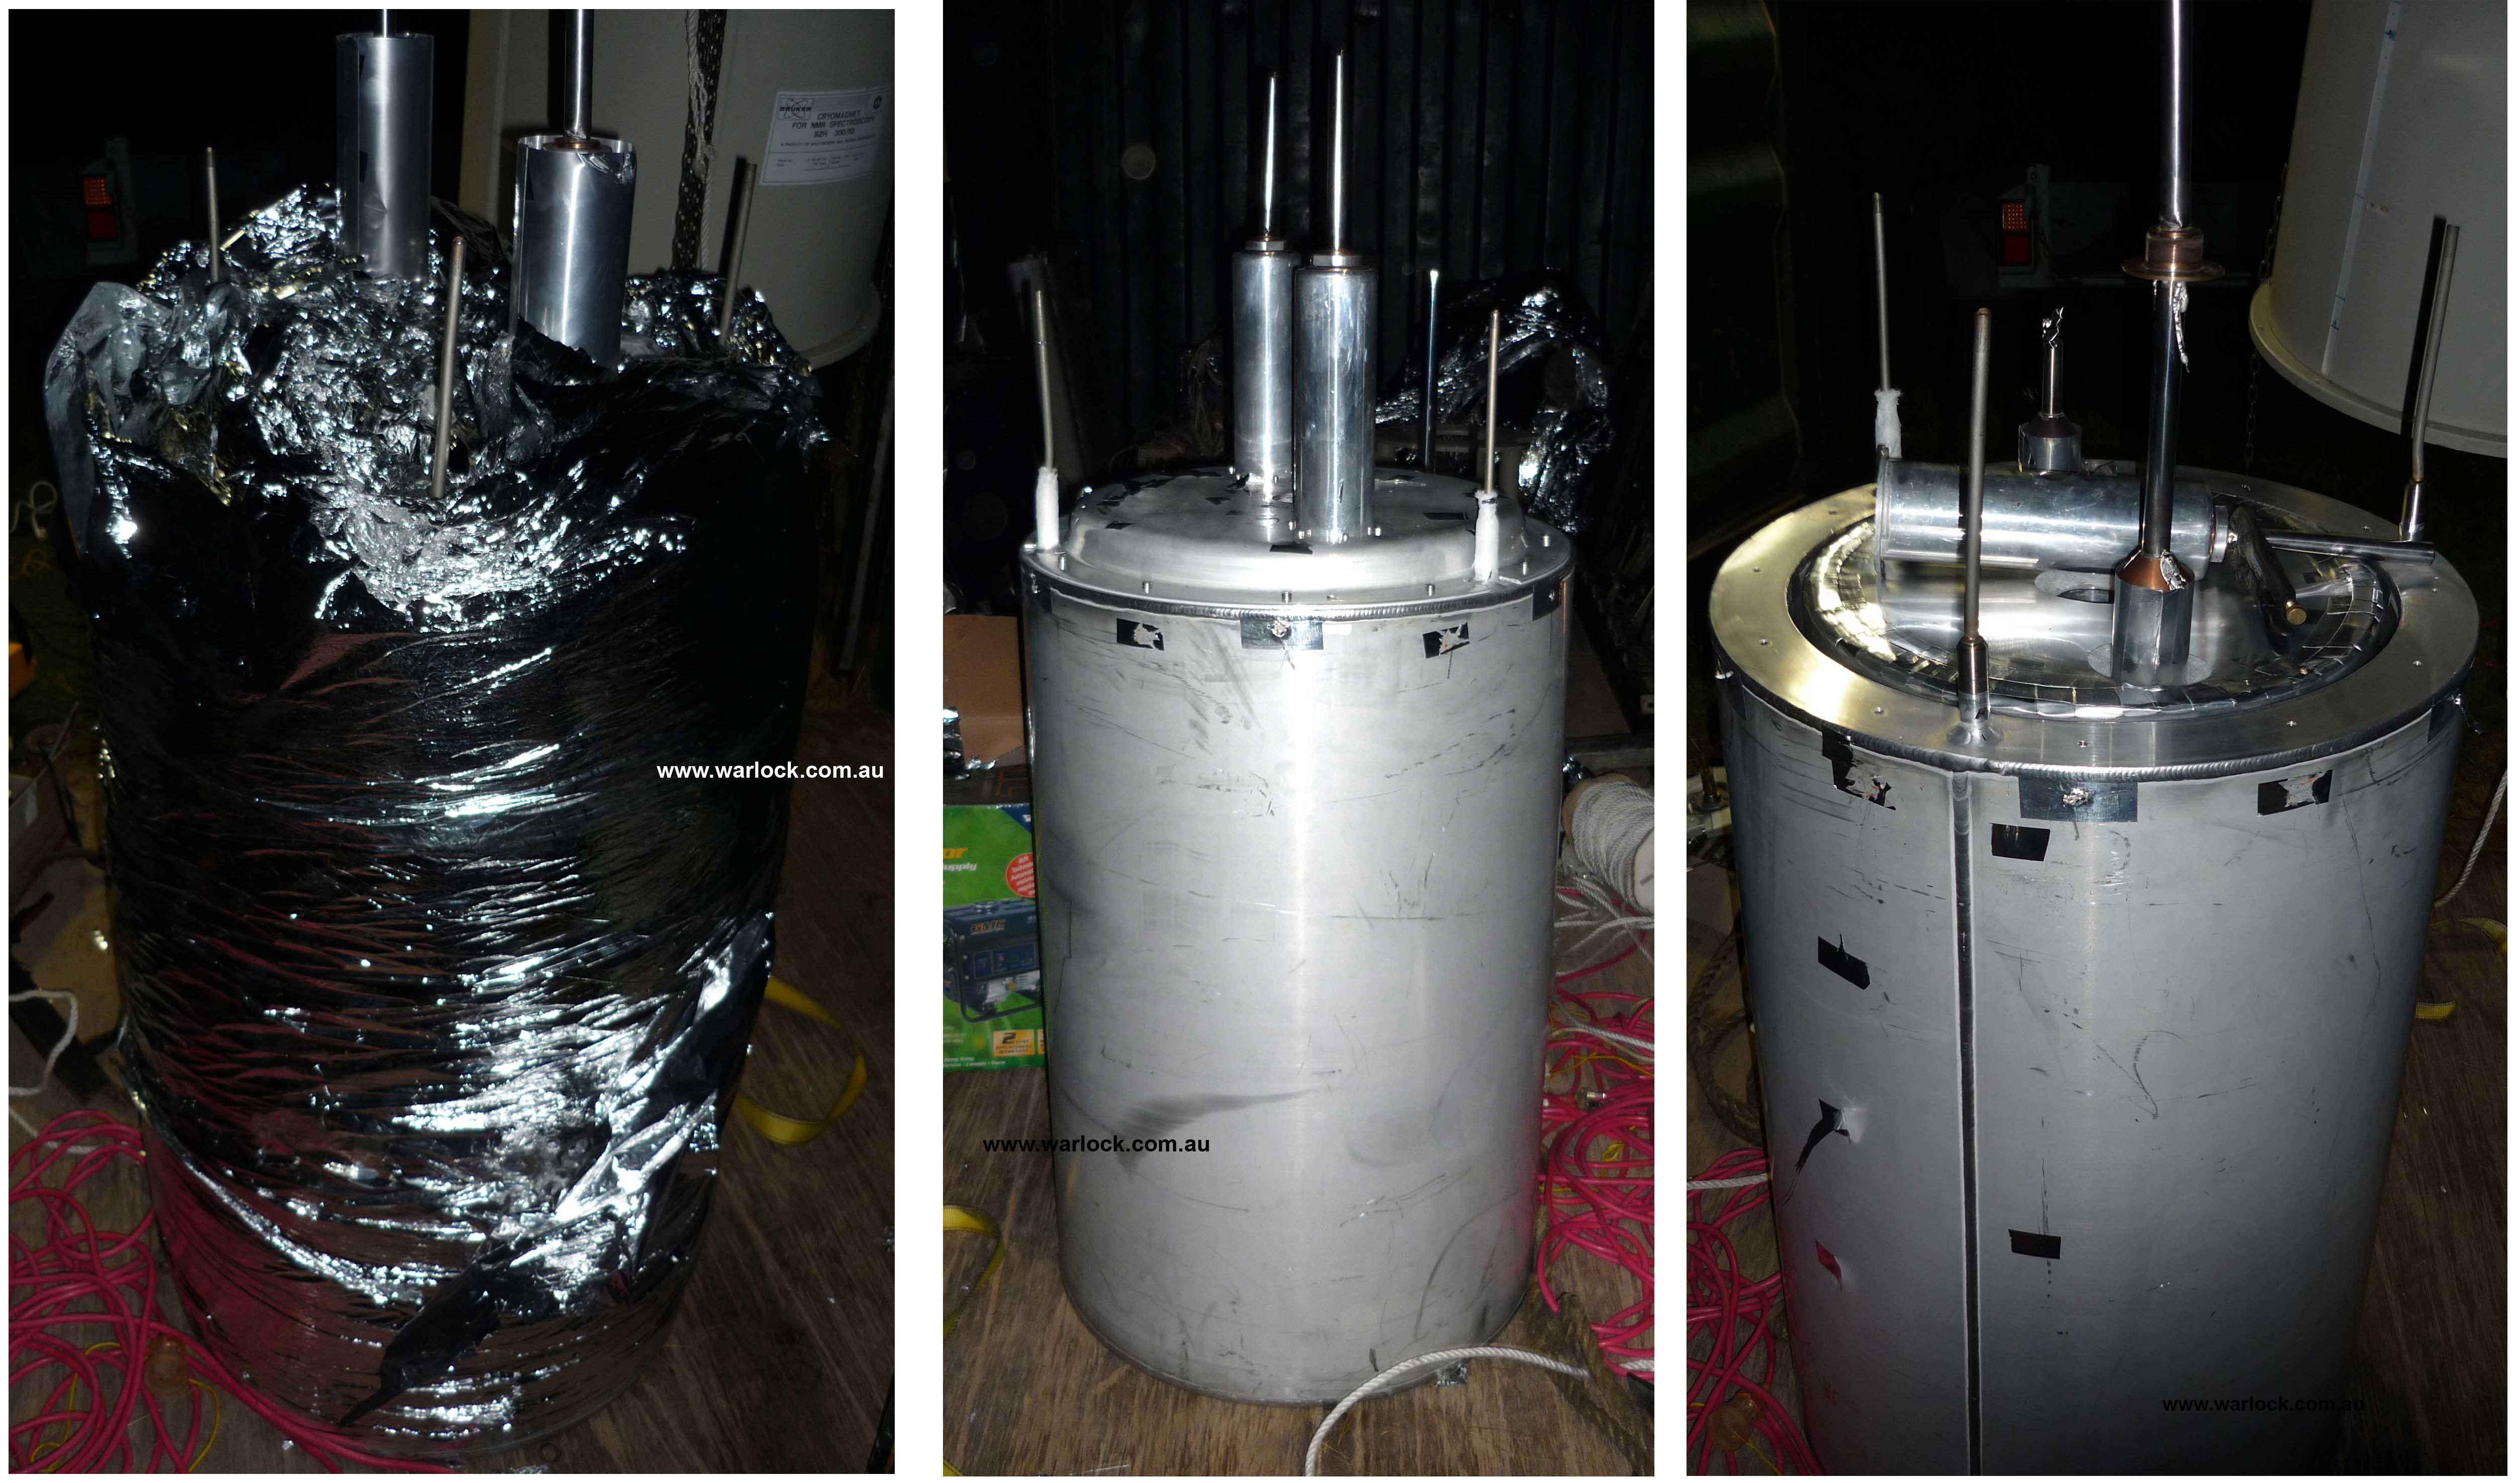 The Mylar sheet was partially unwrapped and then lifted over the top of the inside vessels. The 'Liquid Nitrogen Vessel' and 'Liquid Helium Vessel' as well as fill tubes are held in position using an aluminium top plate. The top plate was removed which completely detached the 'Liquid Nitrogen Vessel' from the remaining cylinders.